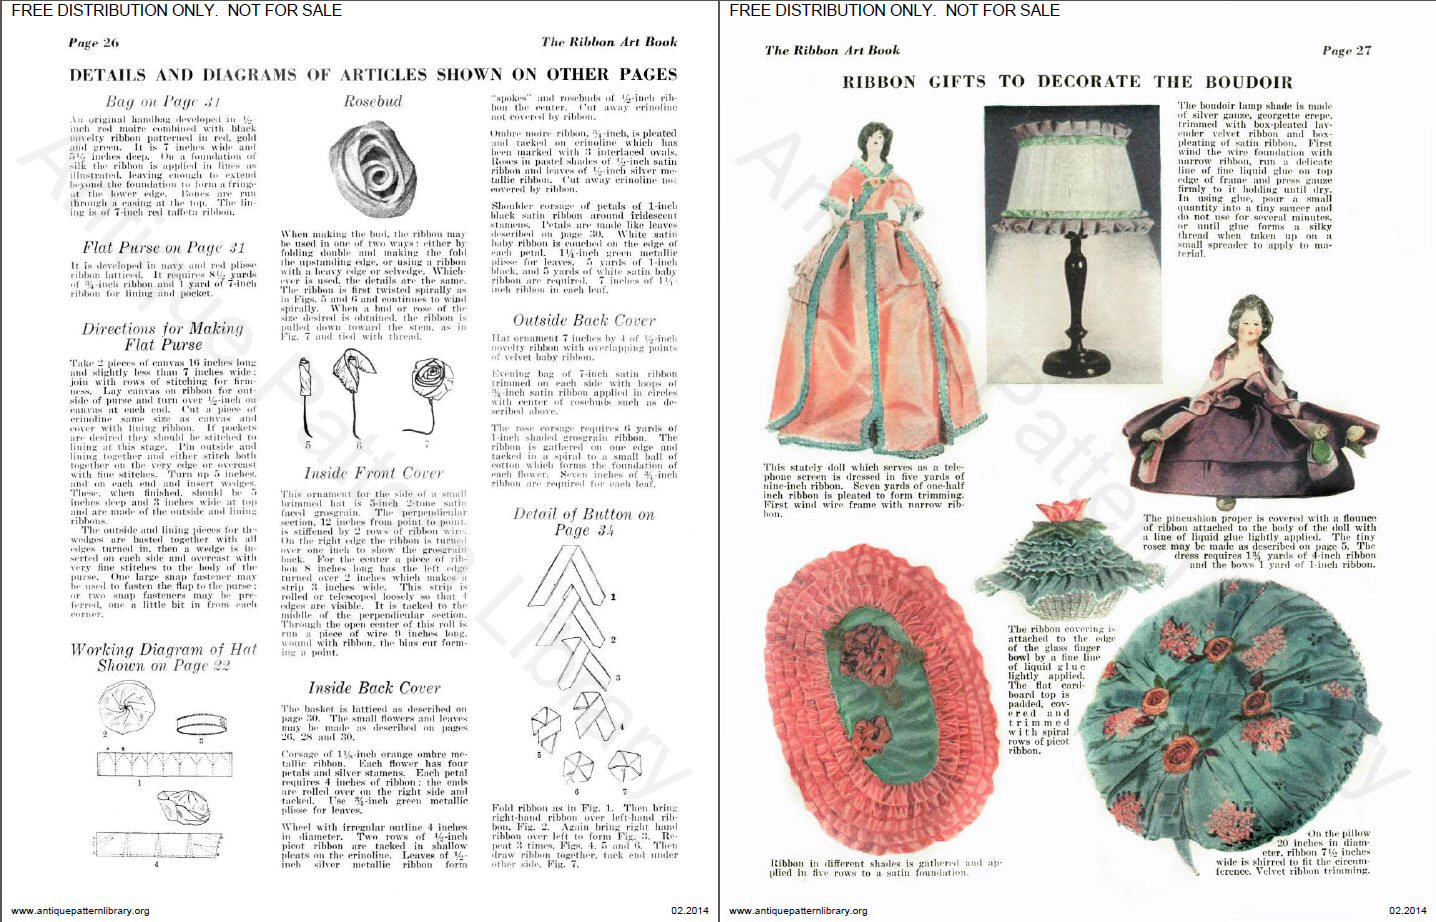 Details and diagrams of articles shown on other pages
Ribbon gifts to decorate the boudoir